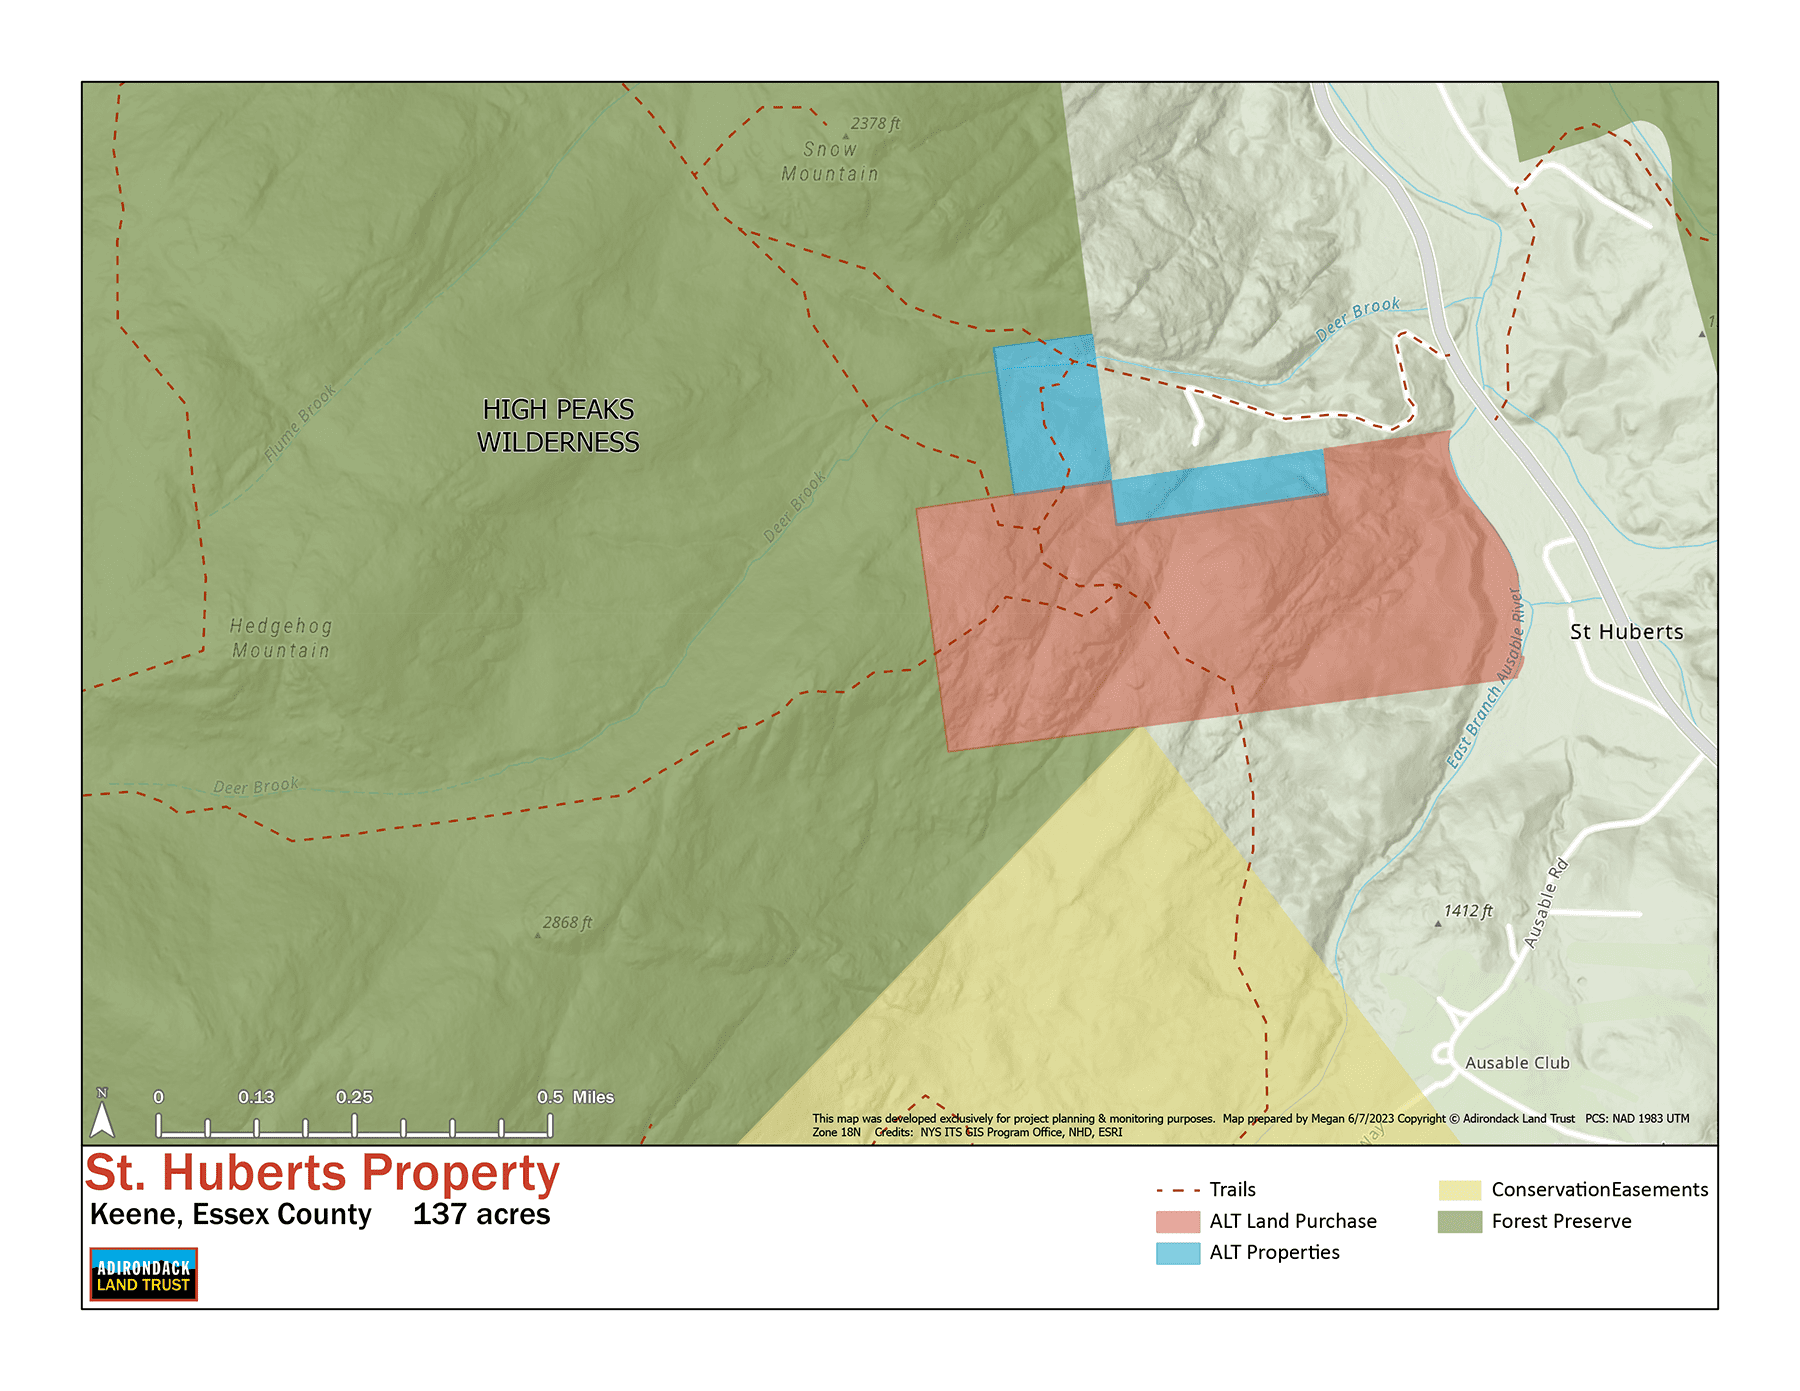 The Adirondack Land Trust purchased 137 acres adjacent to the High Peaks Wilderness in St. Huberts in May. Map courtesy of ALT